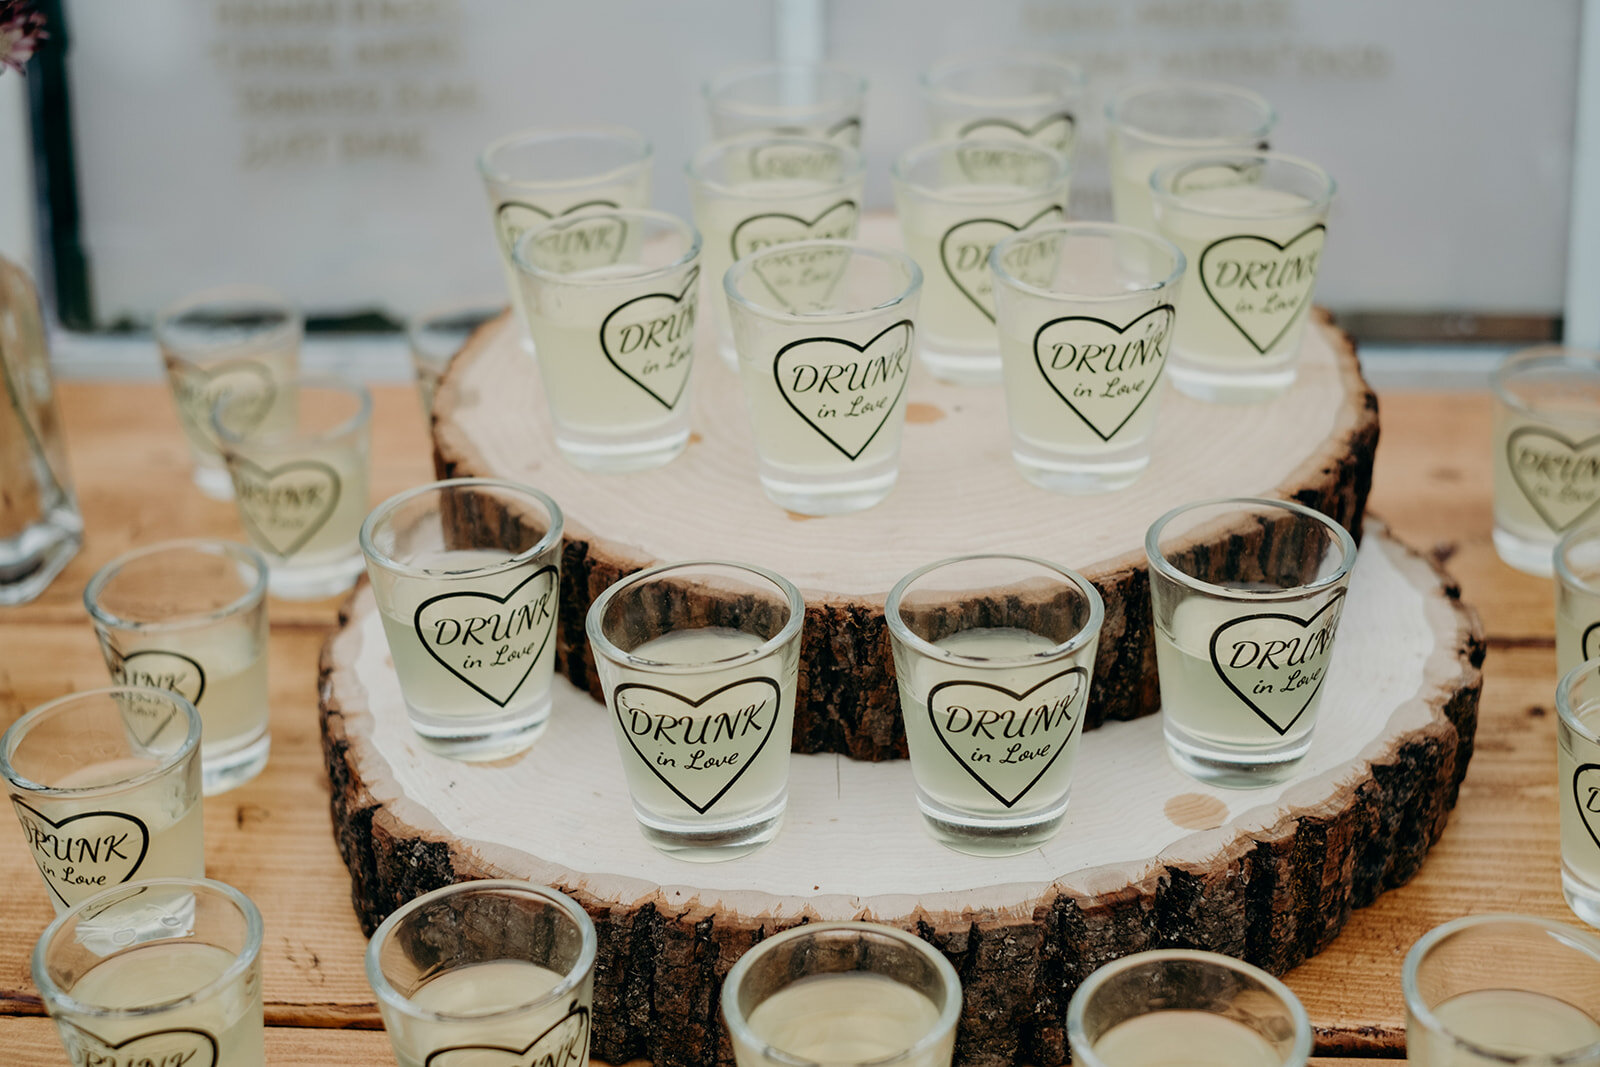 Limoncello shots in "Drunk In Love" shot glasses for guests of the tented wedding reception at Birkby House in Leesburg, VA.